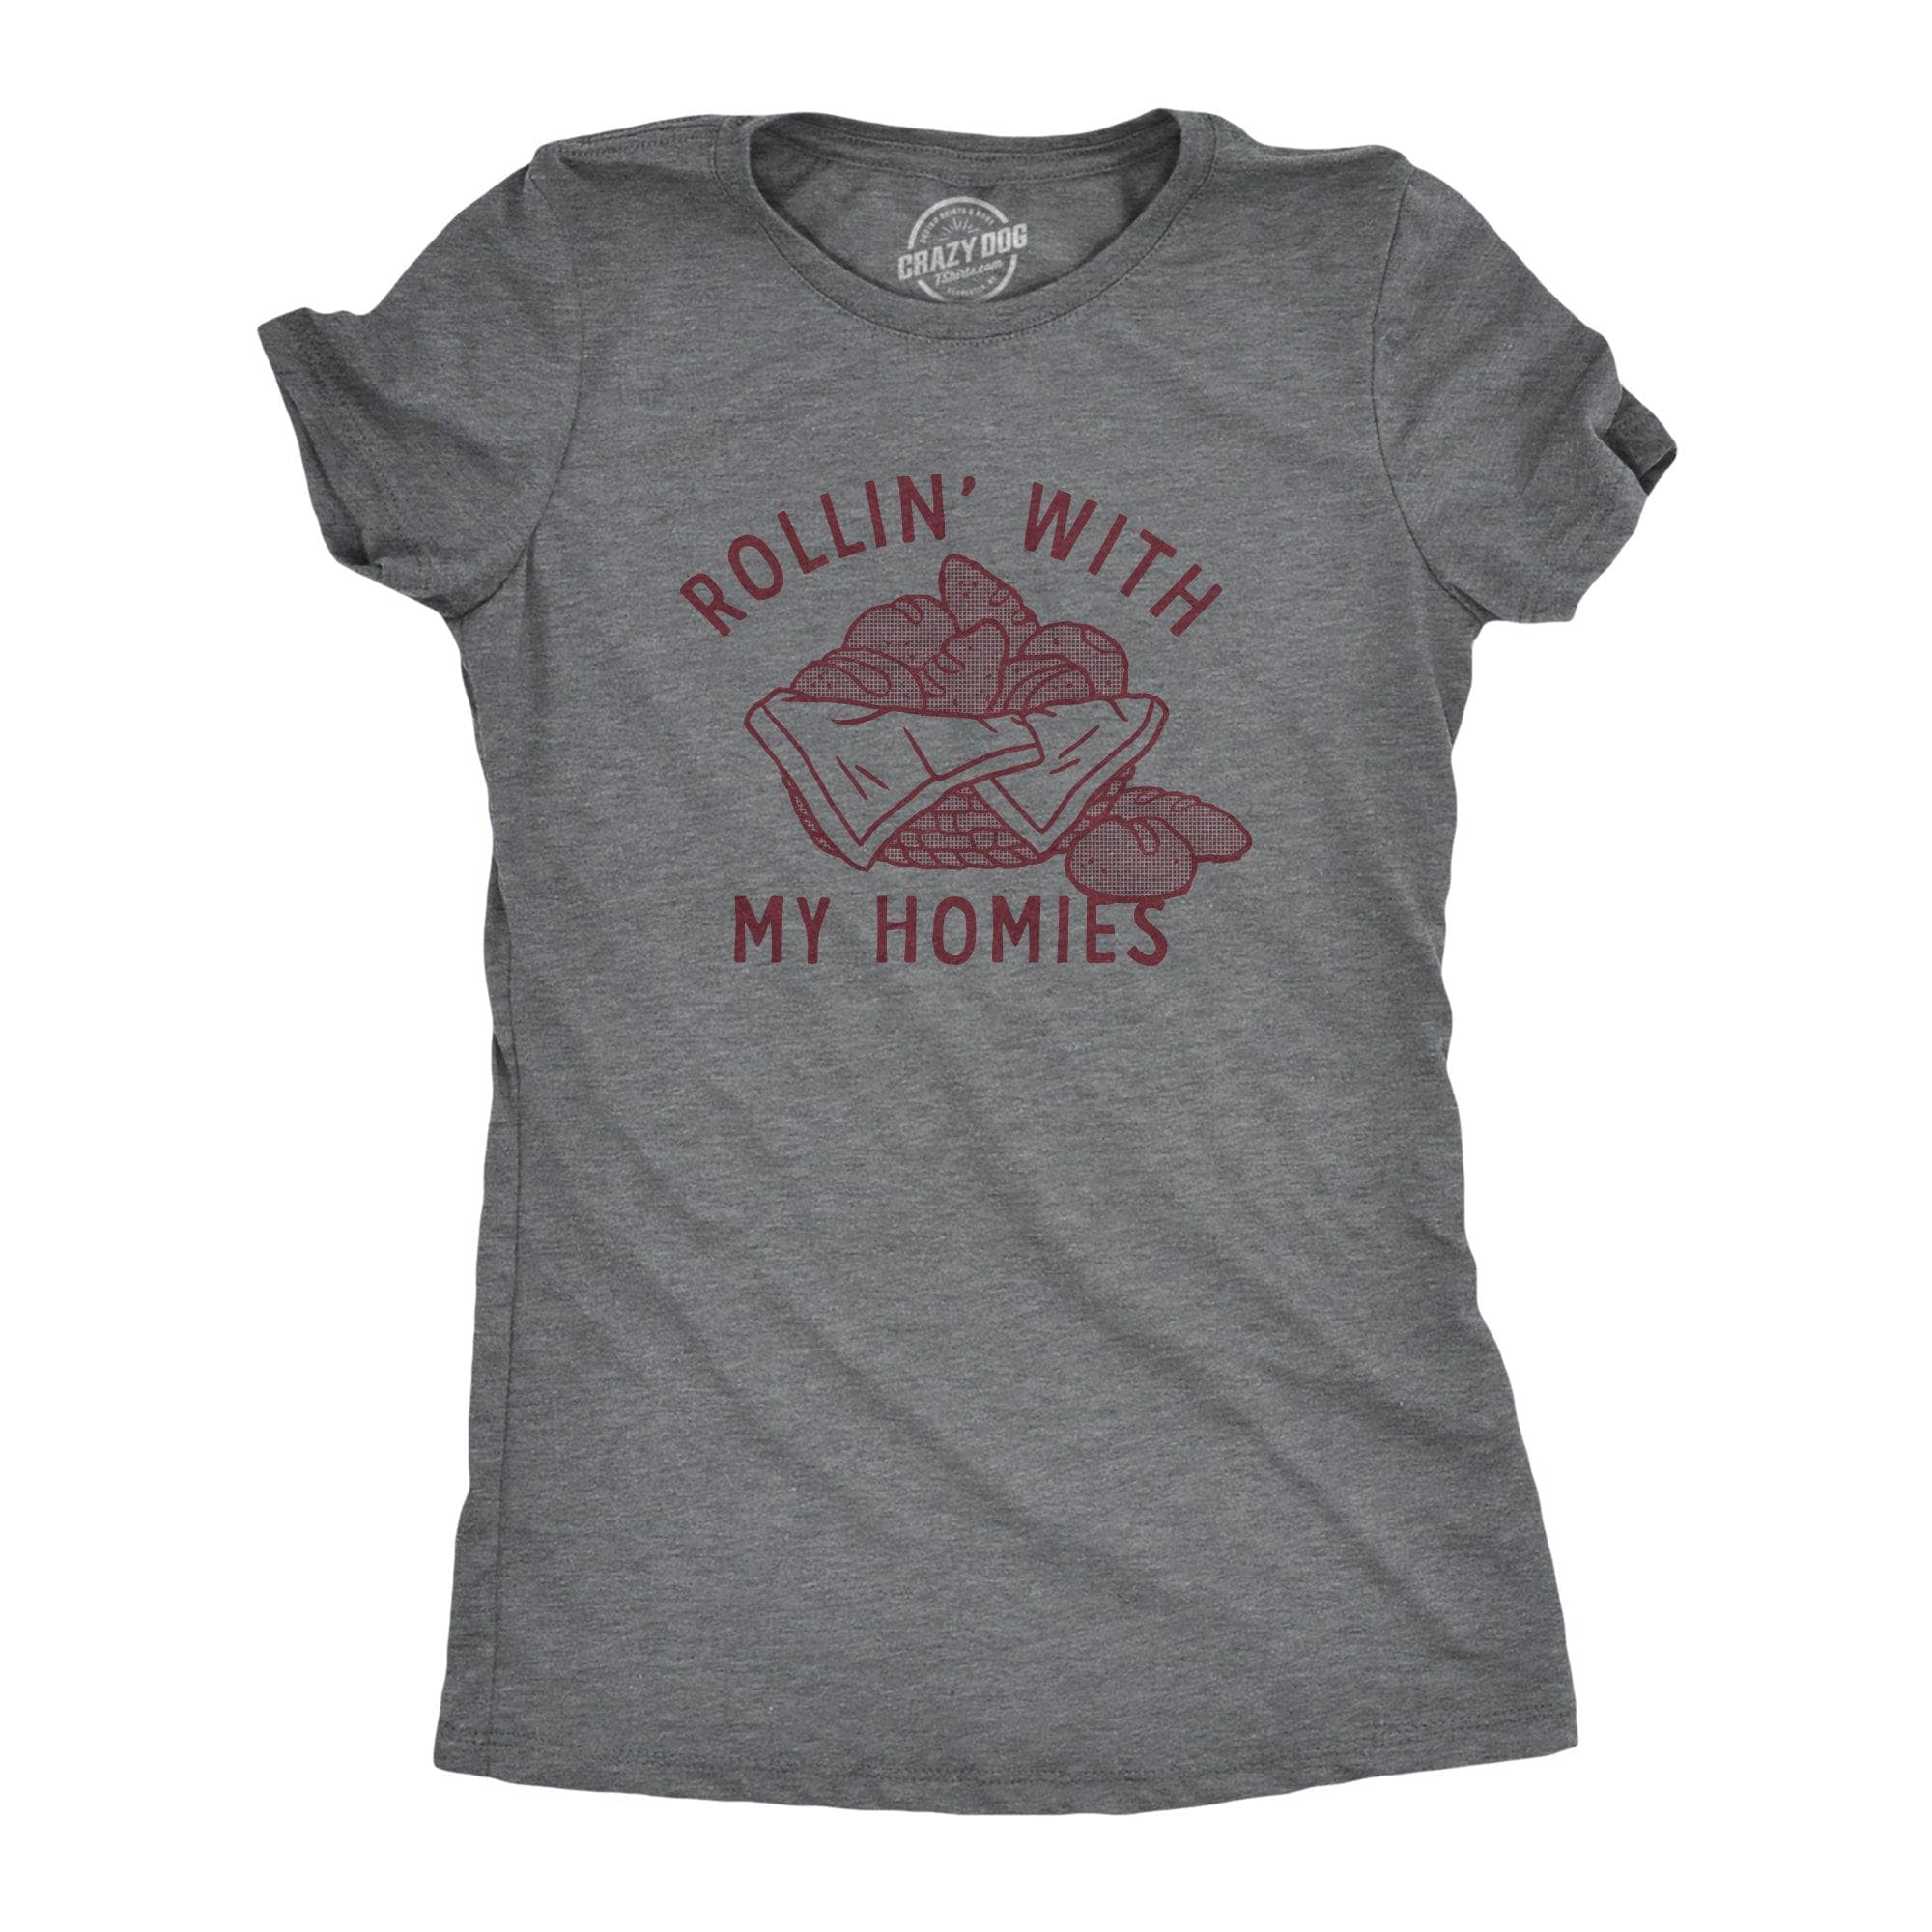 Rollin With My Homies Women's Tshirt  -  Crazy Dog T-Shirts